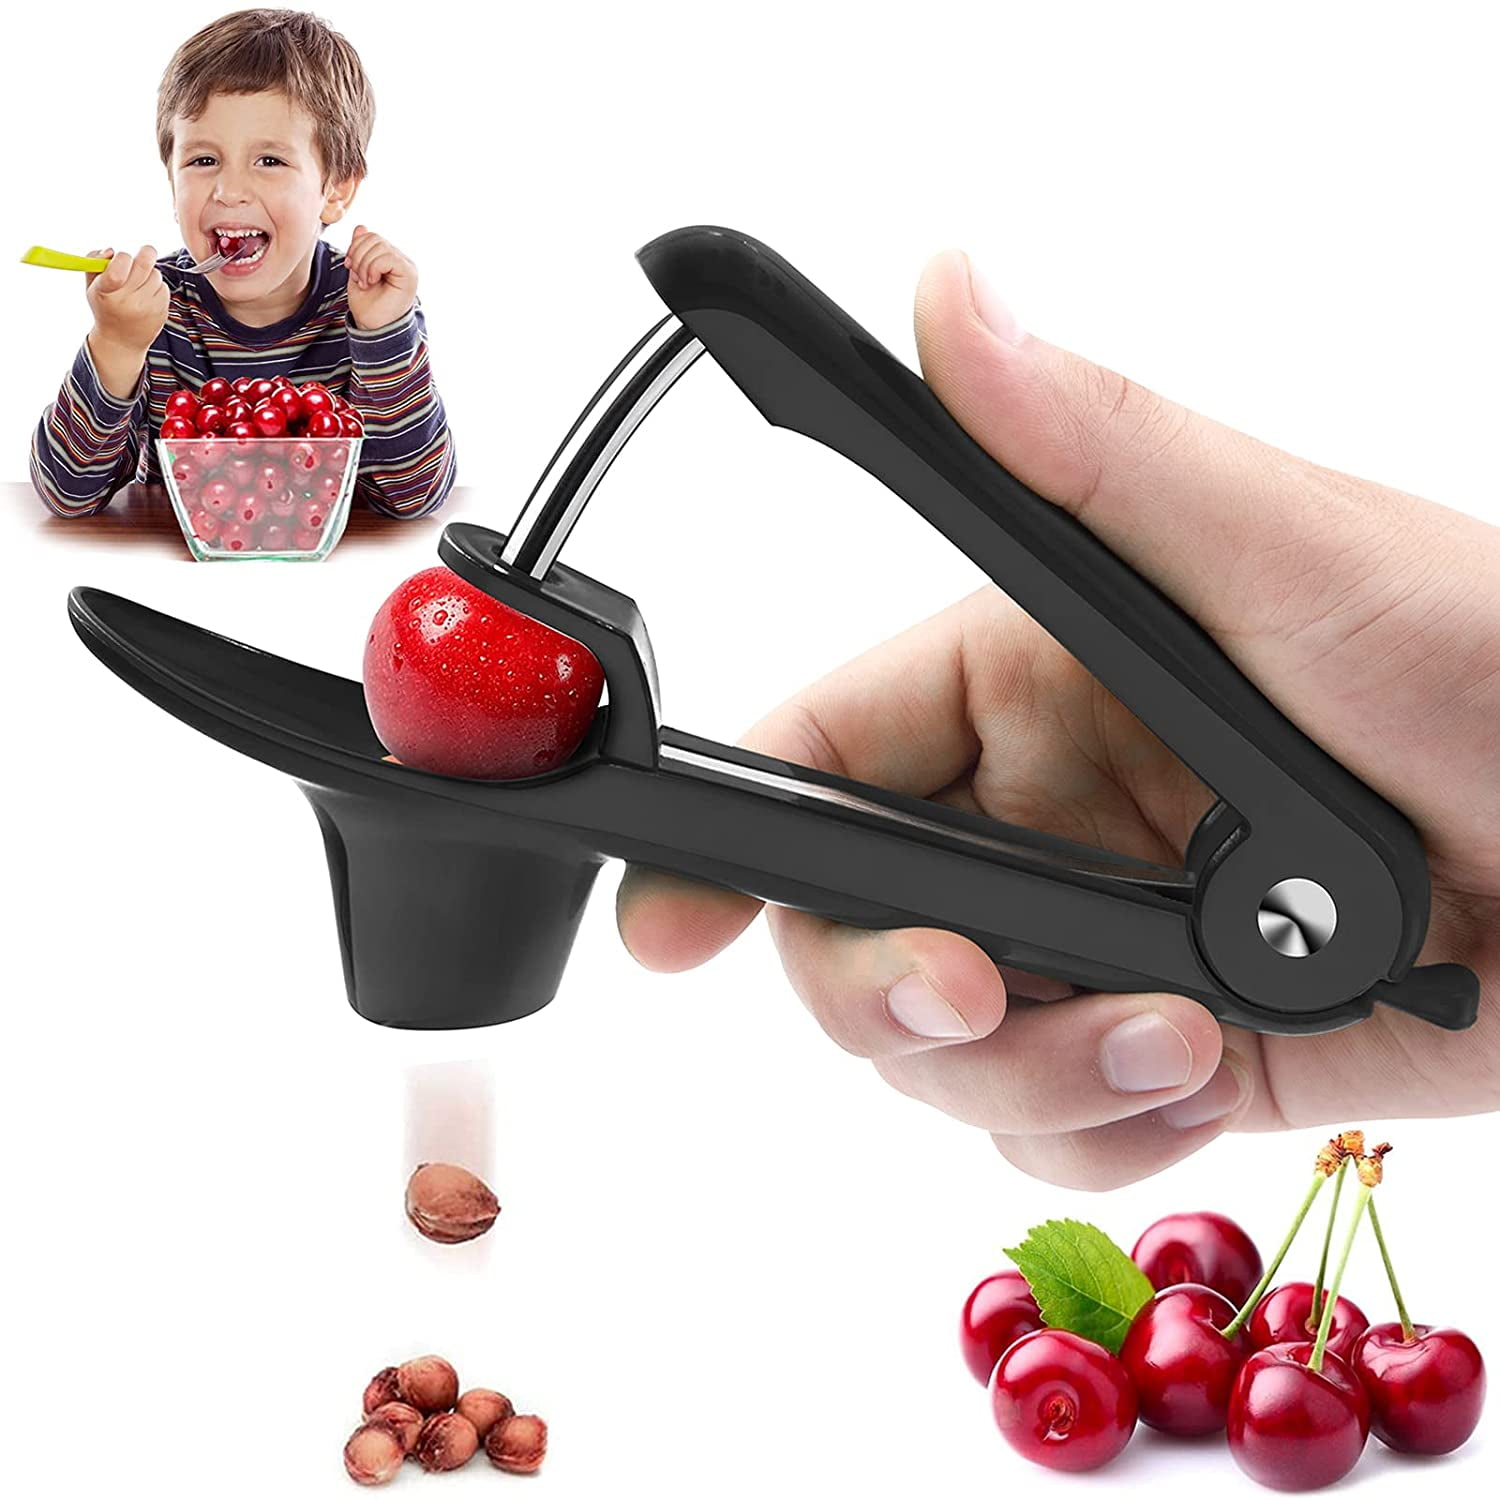 Stainless Steel Cherry Pitter Tool,Pit Remover for Cherries Olive Pit Remover Heavy-Duty Cherry Seed Remover Cherry Pit Remover Tool Cherry Corer Pitter Tool for Cherries Jam Green 